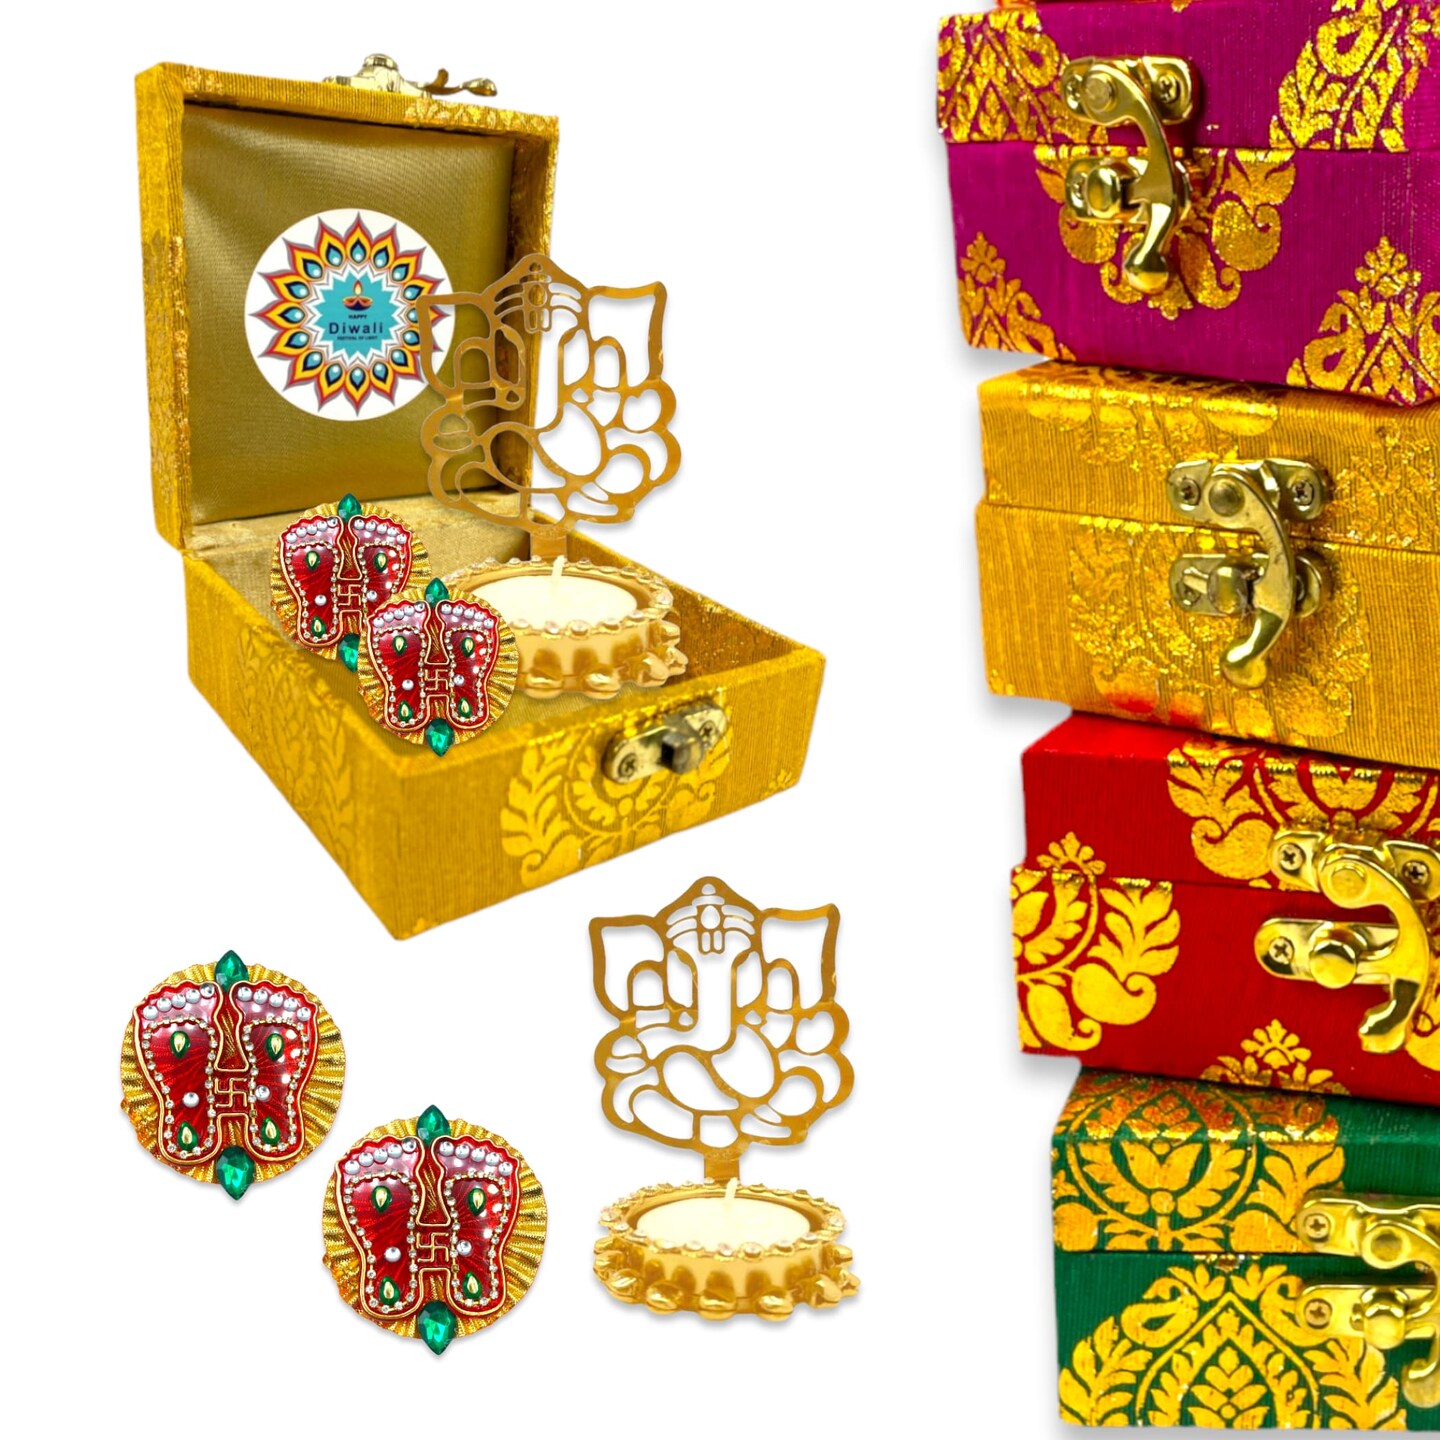 MANTOUSS Diwali gift items/Diwali gifts for friends and family/Diwali gift  for employees/Diwali gift hamper-Decorated tokri+Handcrafted Chocolate  box+gel filled lalten+rangoli colours+Deepawali greeting card Assorted Gift  Box Price in India - Buy ...